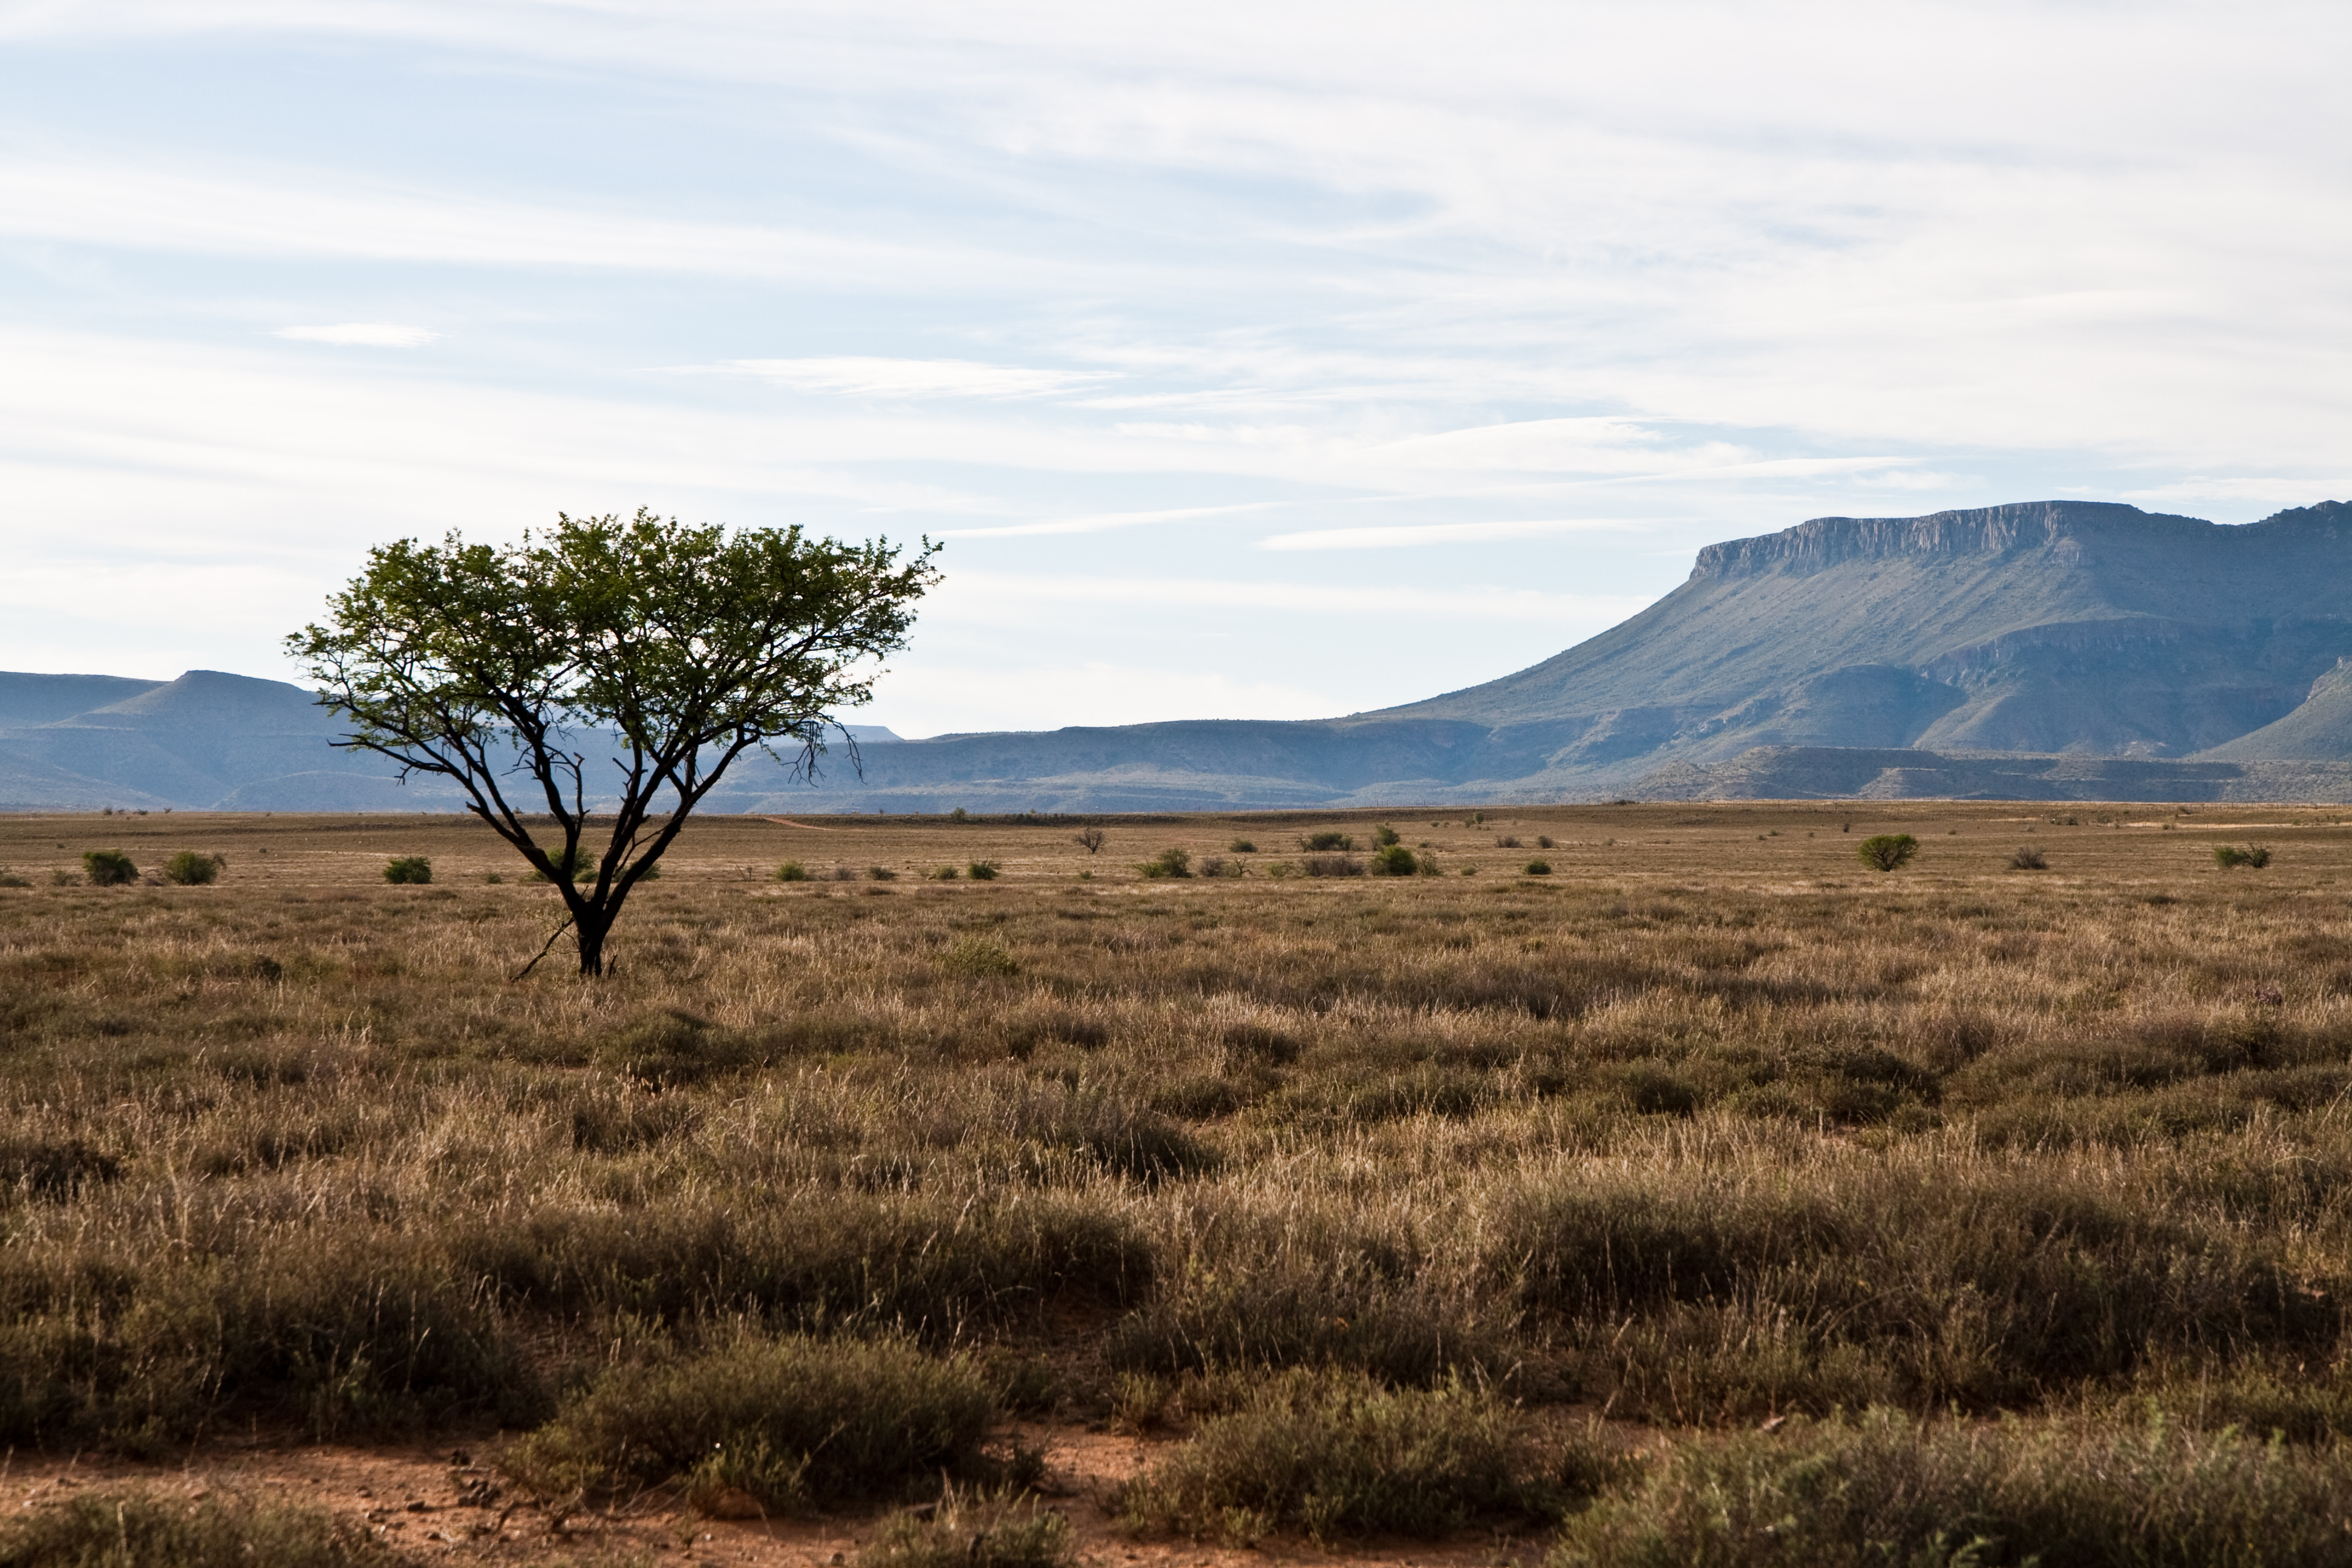 South Africa Landscape Creative Commons Wallpaper 6 | Flickr ...